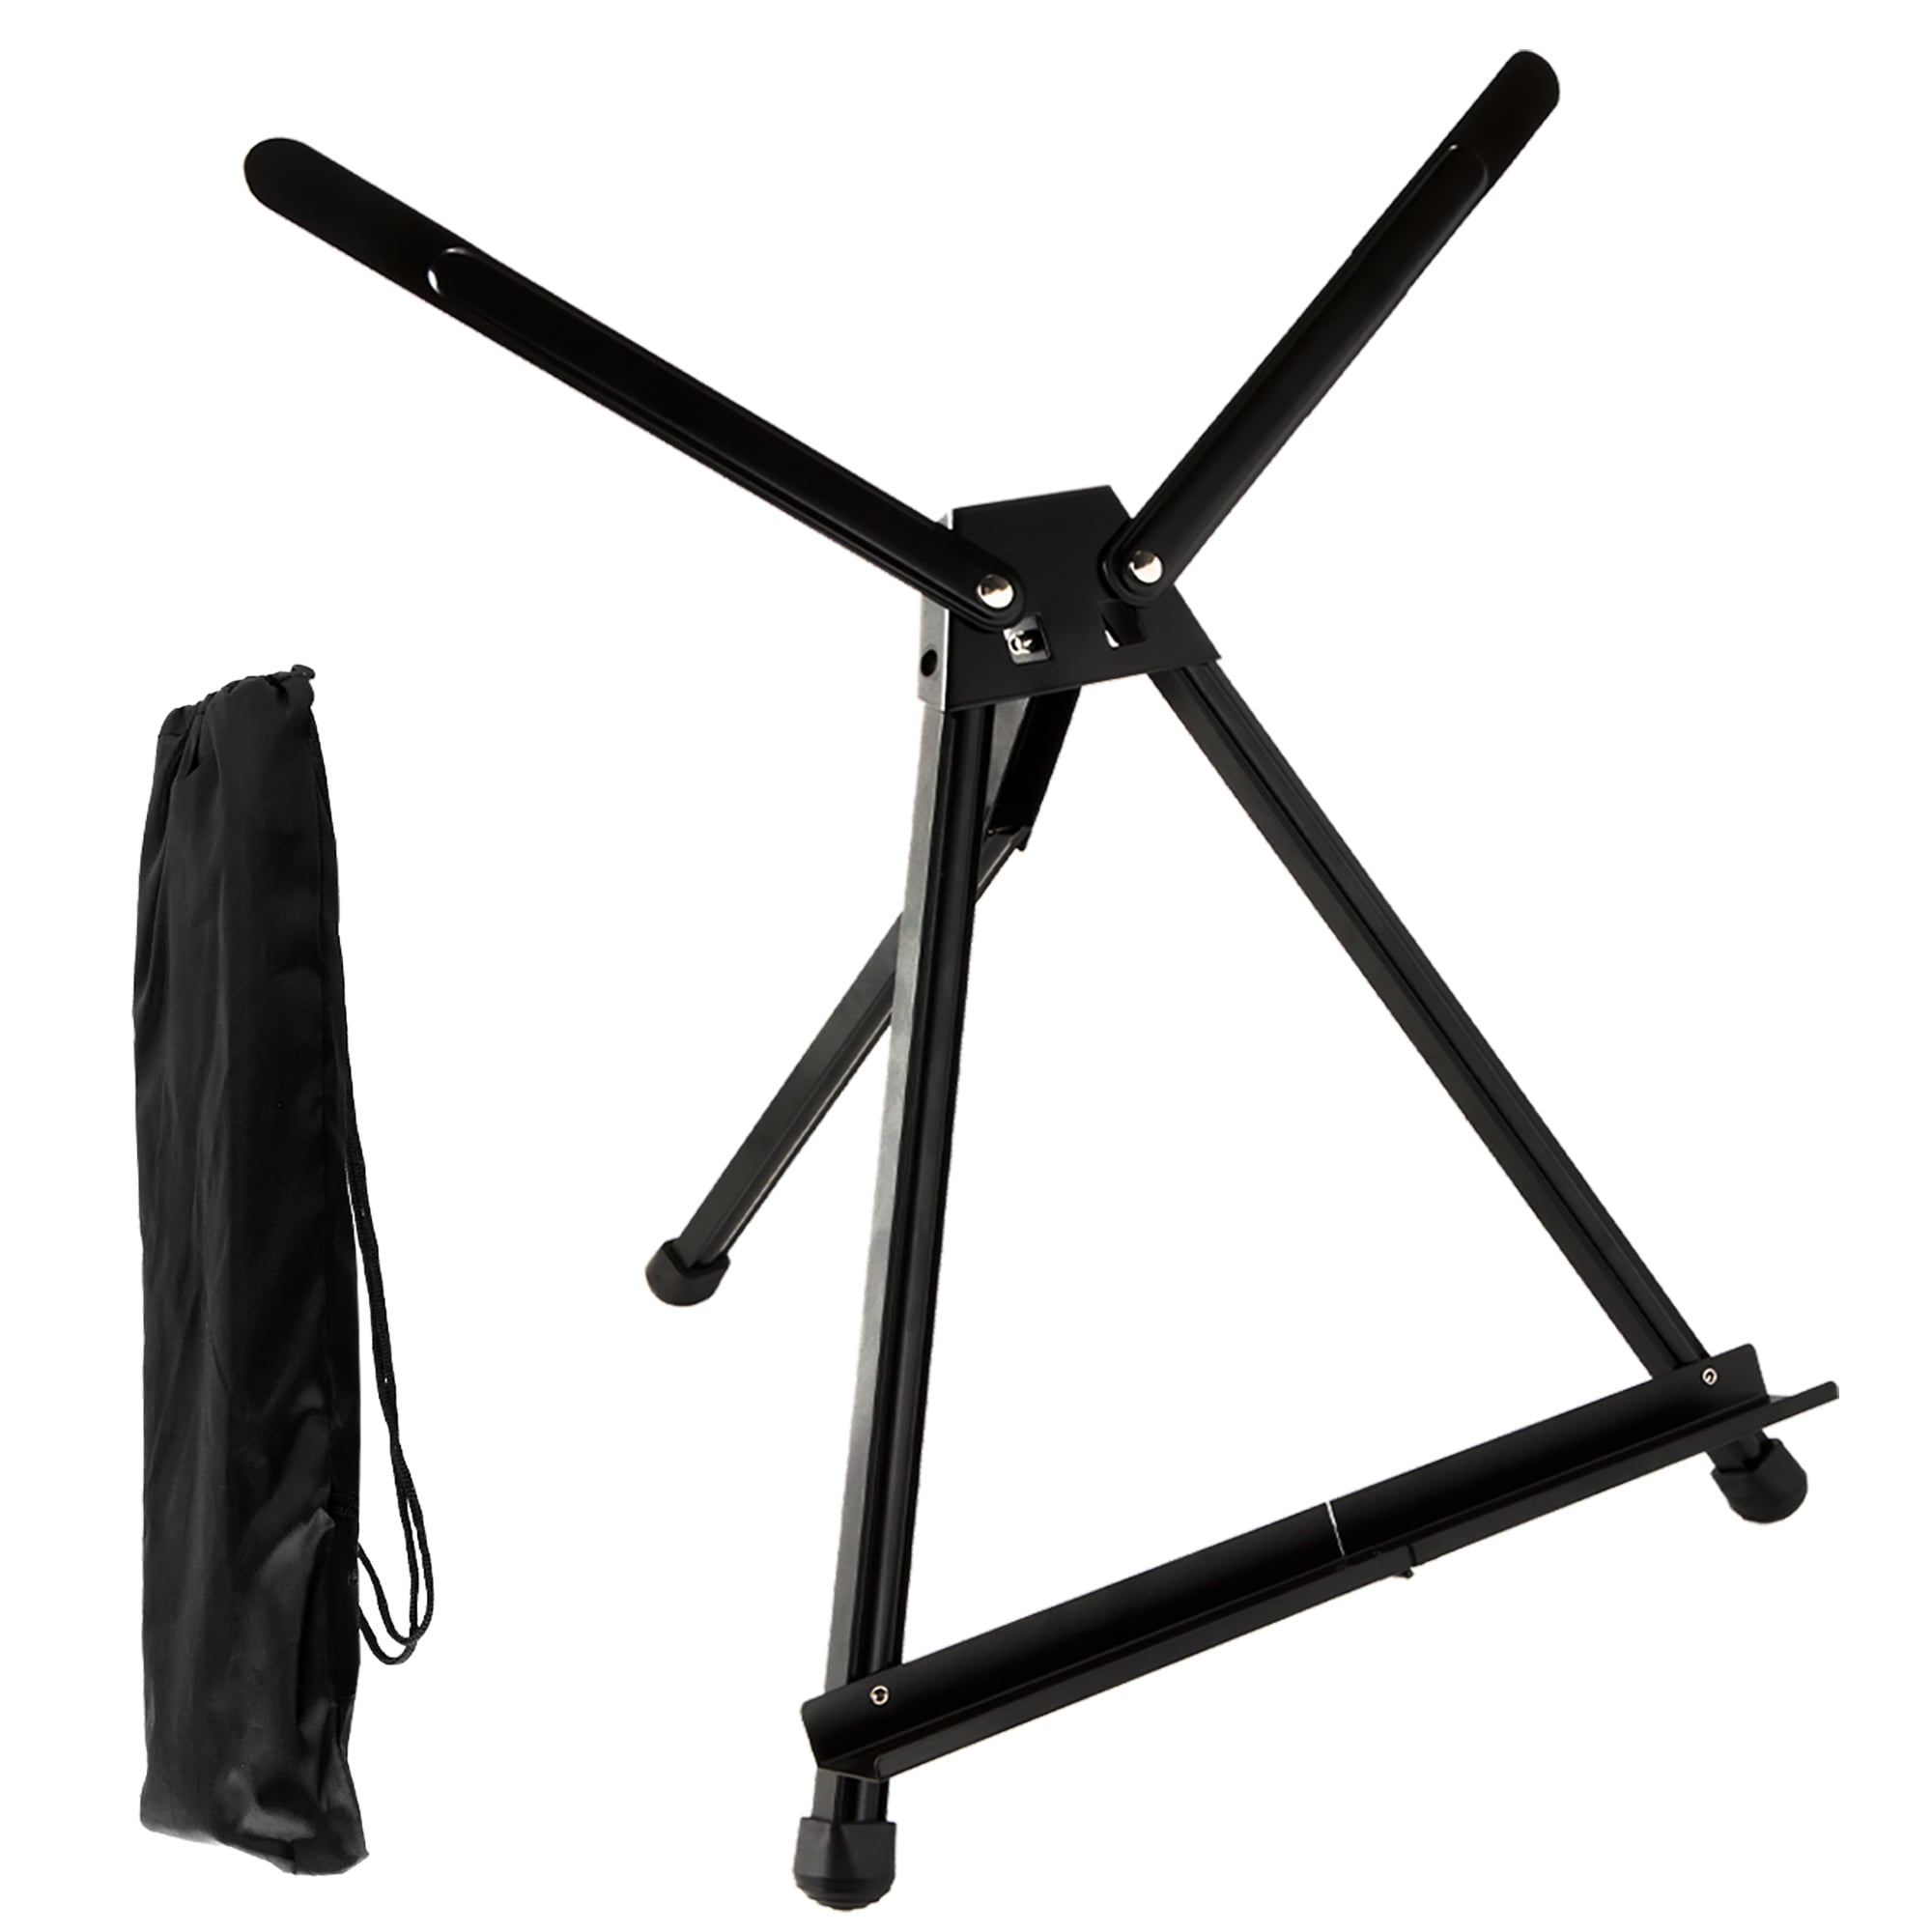  63 Telescoping Easel,Aluminum Easels For Signs,Easel Stand  For Display,Easel For Wedding Sign Poster,Portable Art Easel Stand For  Painting, Whiteboard Easel Support 25 Lbs, 1pcs